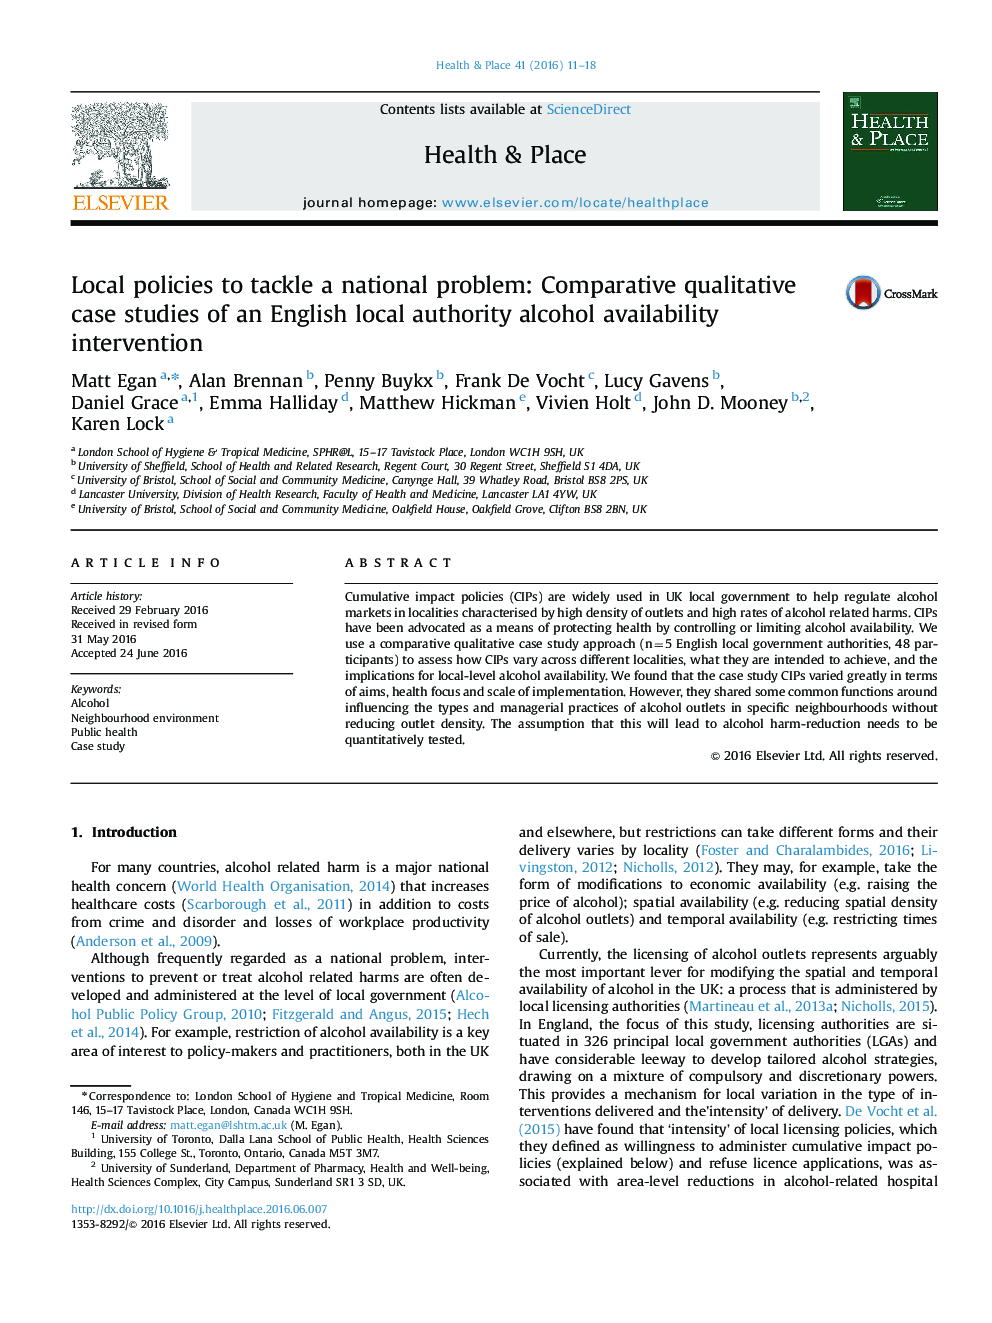 Local policies to tackle a national problem: Comparative qualitative case studies of an English local authority alcohol availability intervention